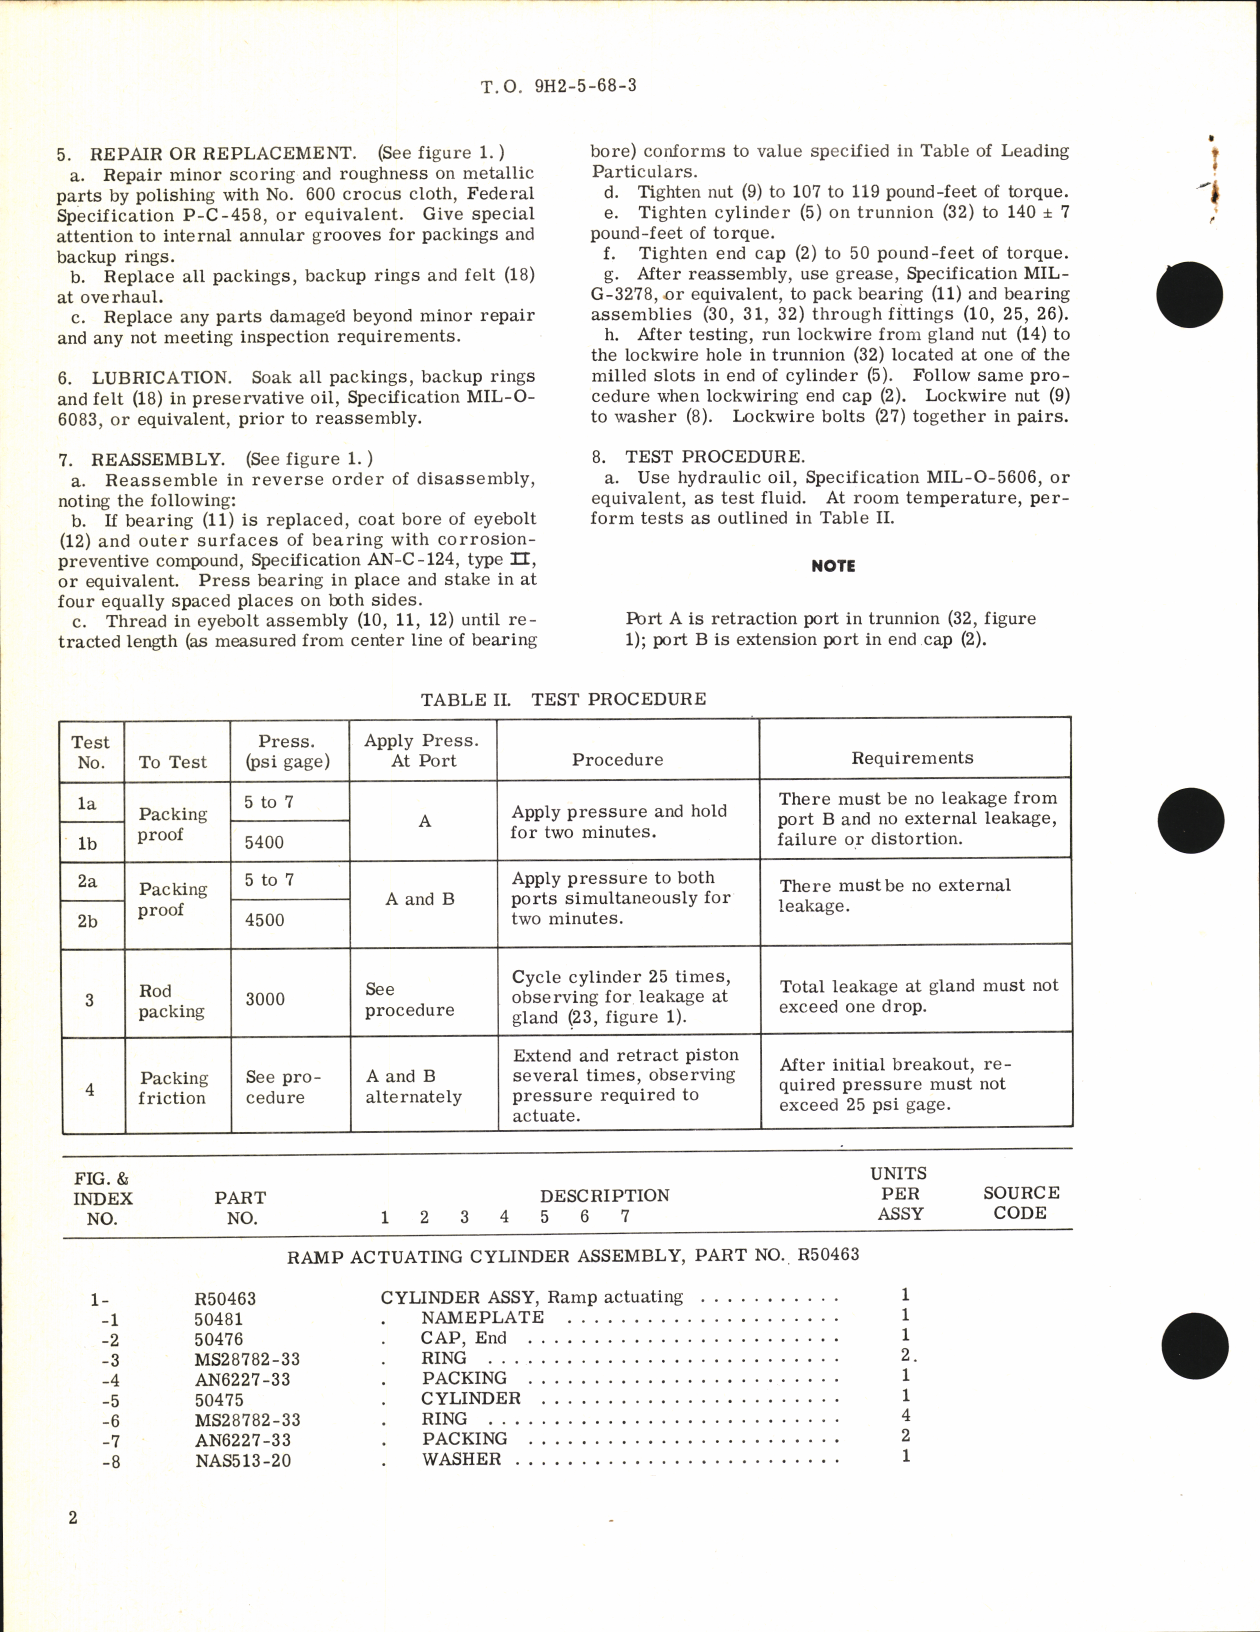 Sample page 2 from AirCorps Library document: Overhaul Instructions with Parts Breakdown for Ramp actuating Cylinder Assembly Part No. R50463